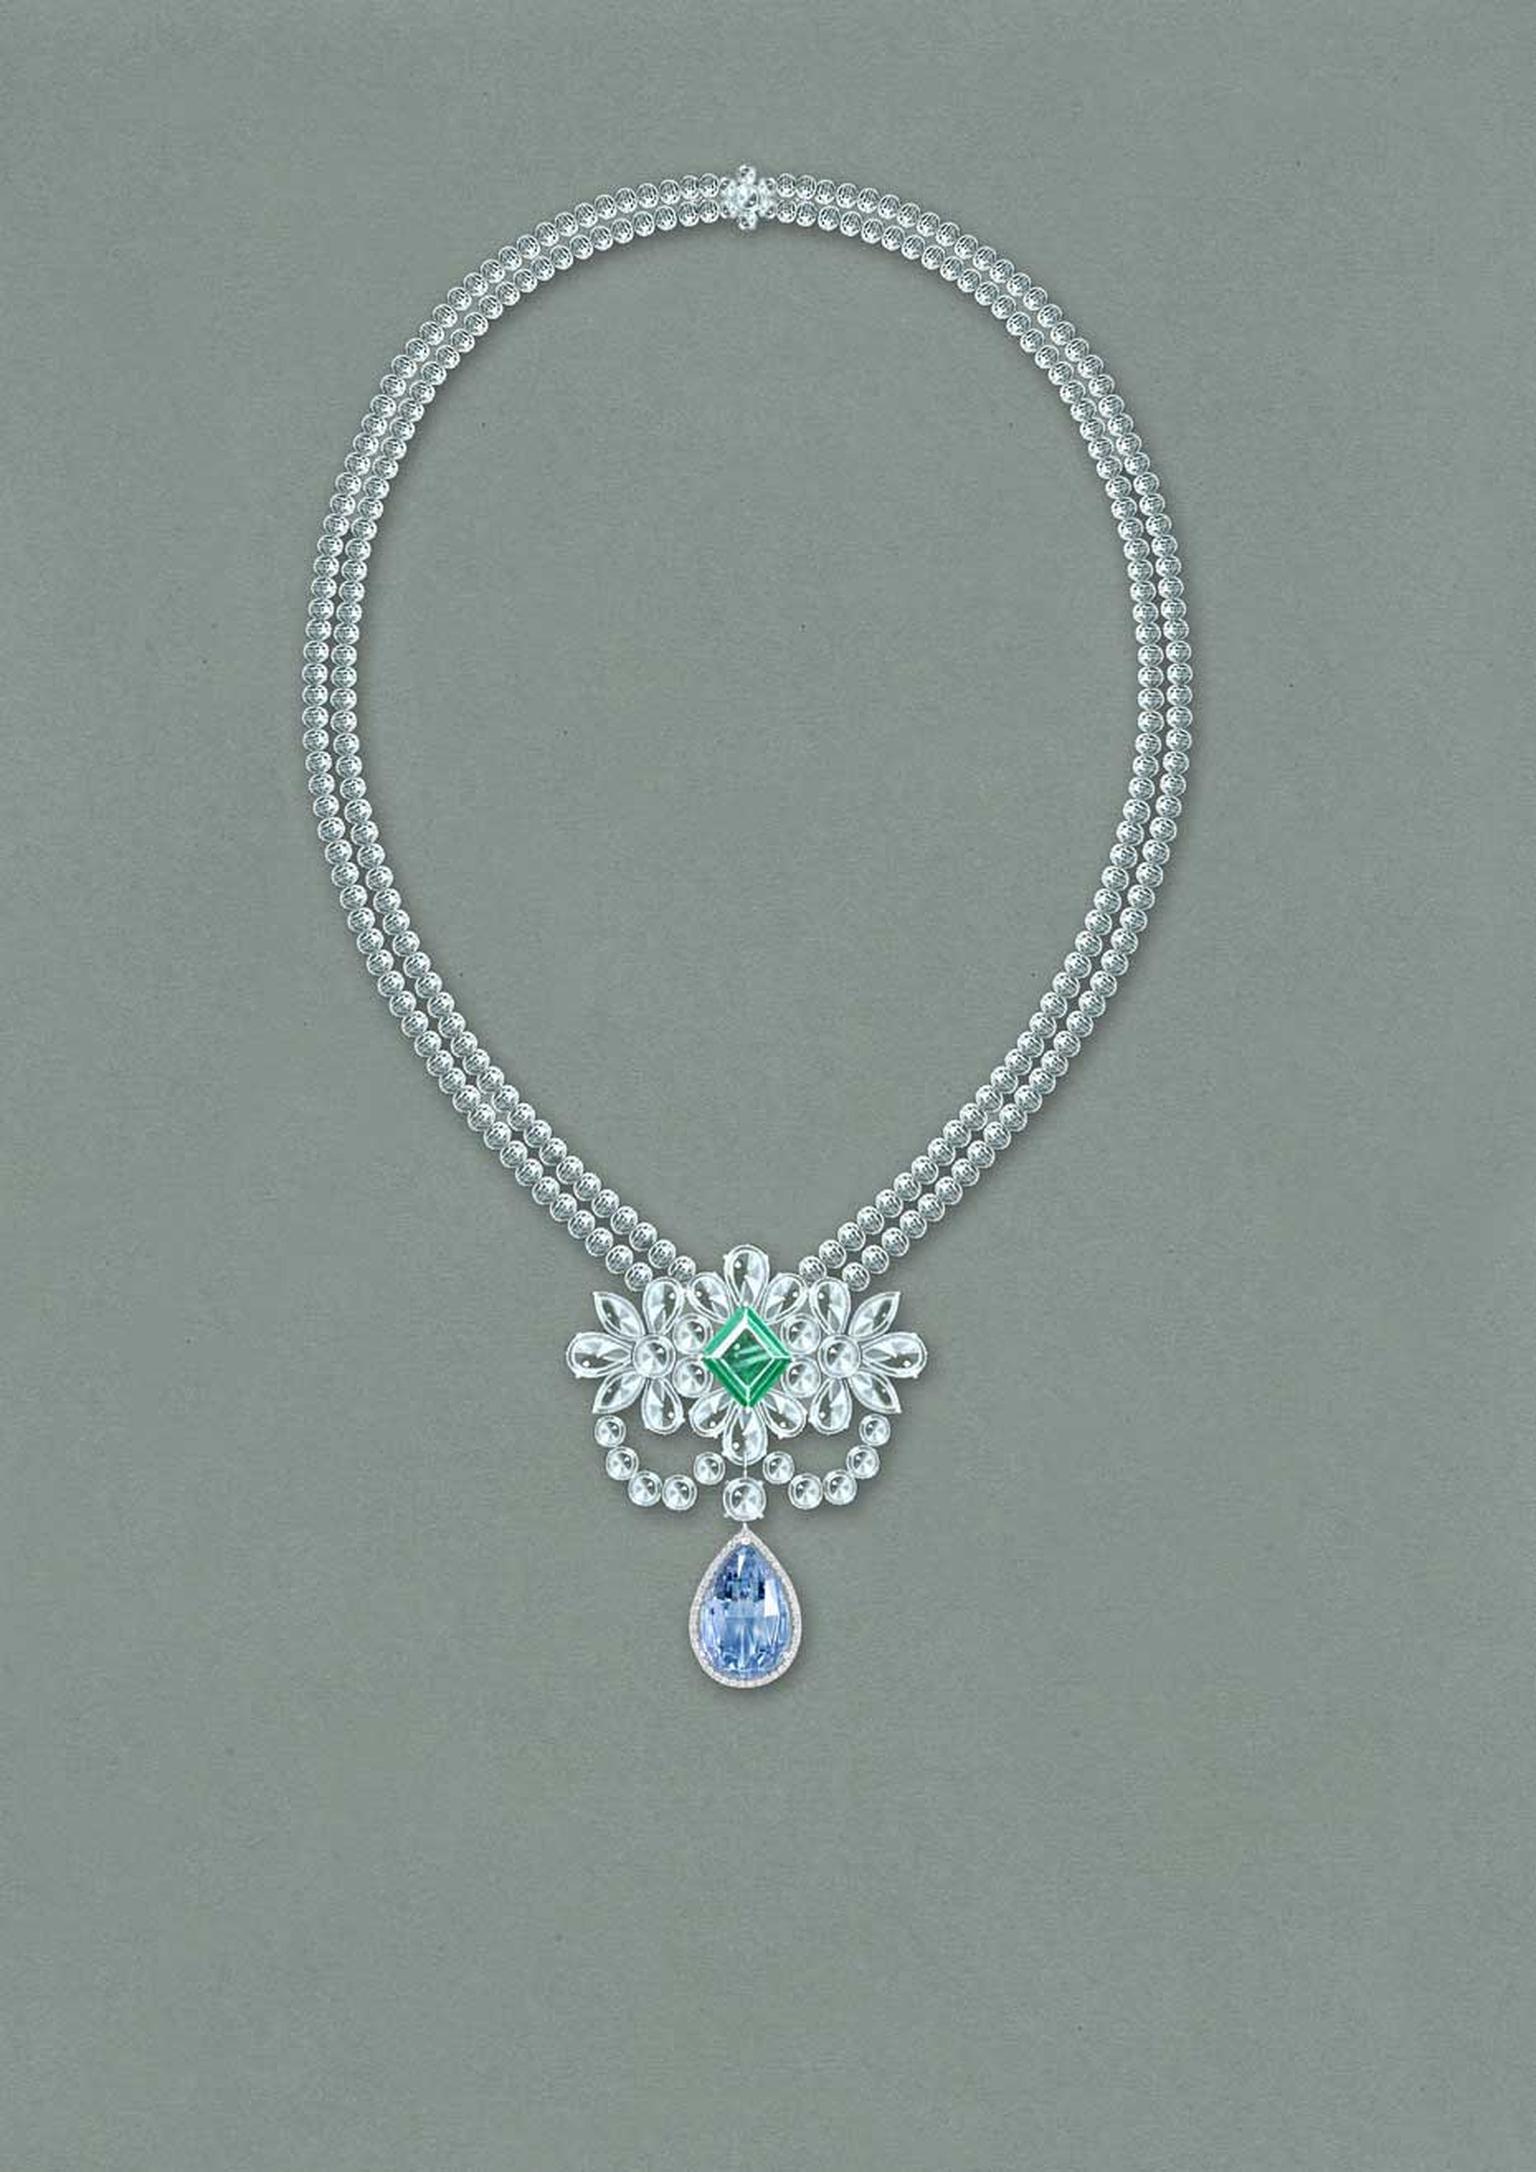 Graff's Le Collier Bleu de Reve necklace features a 10.47ct Fancy Vivid Blue Internally Flawless briolette diamond, above which sits a stunning 4.22 carat old-mine Colombian emerald. The necklace is composed of 192 faceted beaded diamonds.